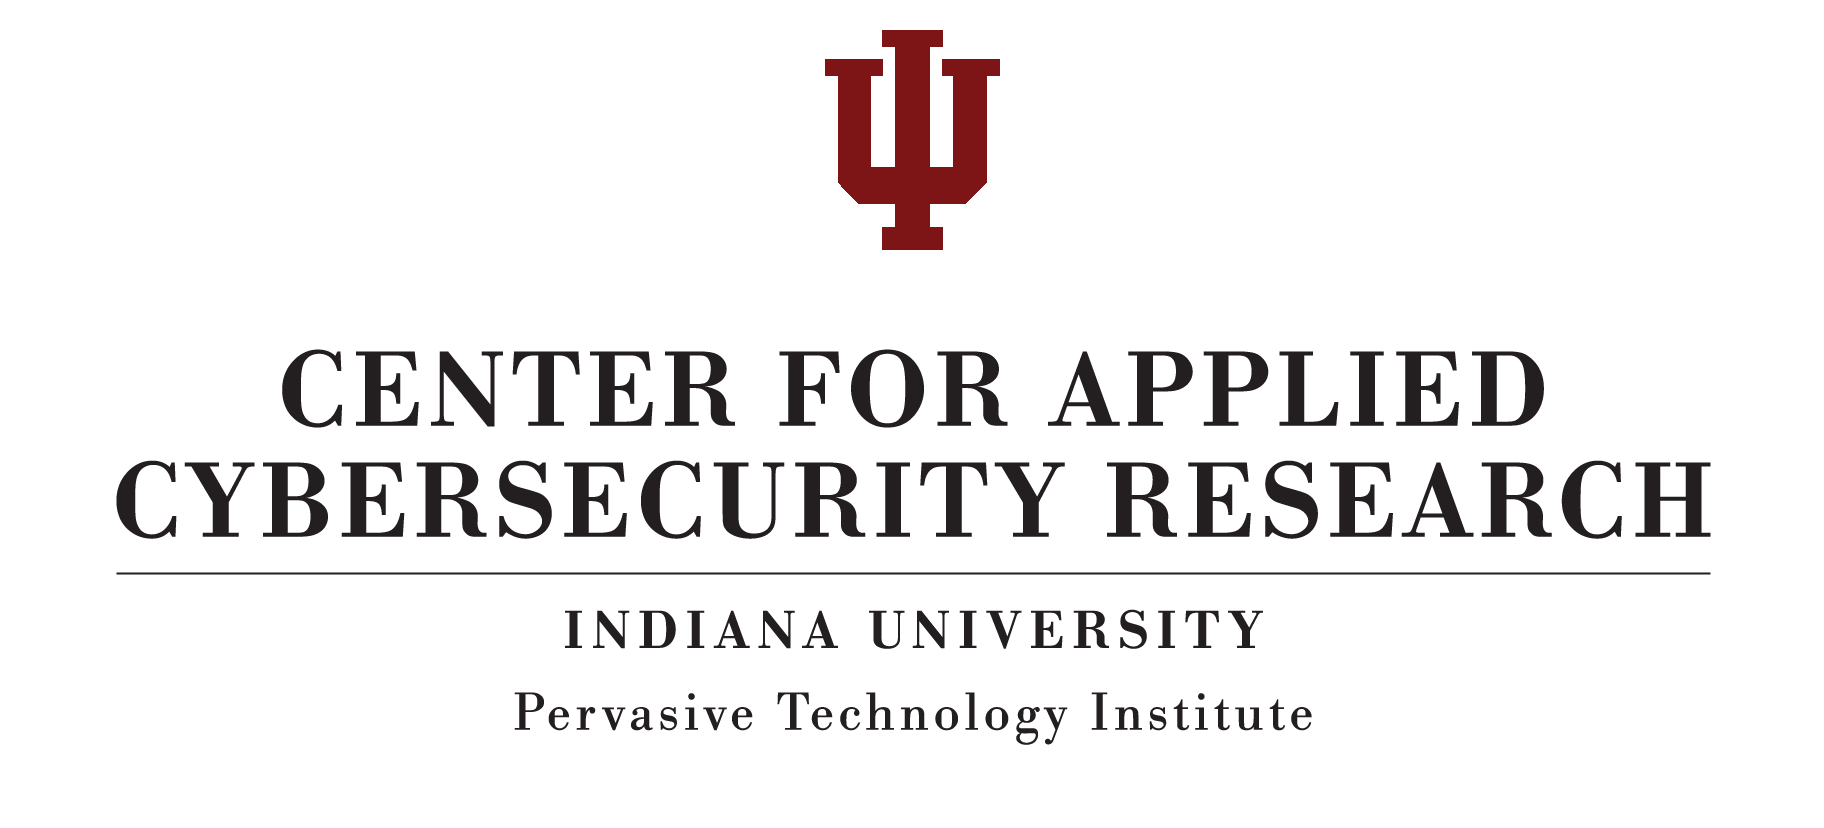 IU University Logo - SWAMP | Center for Applied Cybersecurity Research Indiana University ...